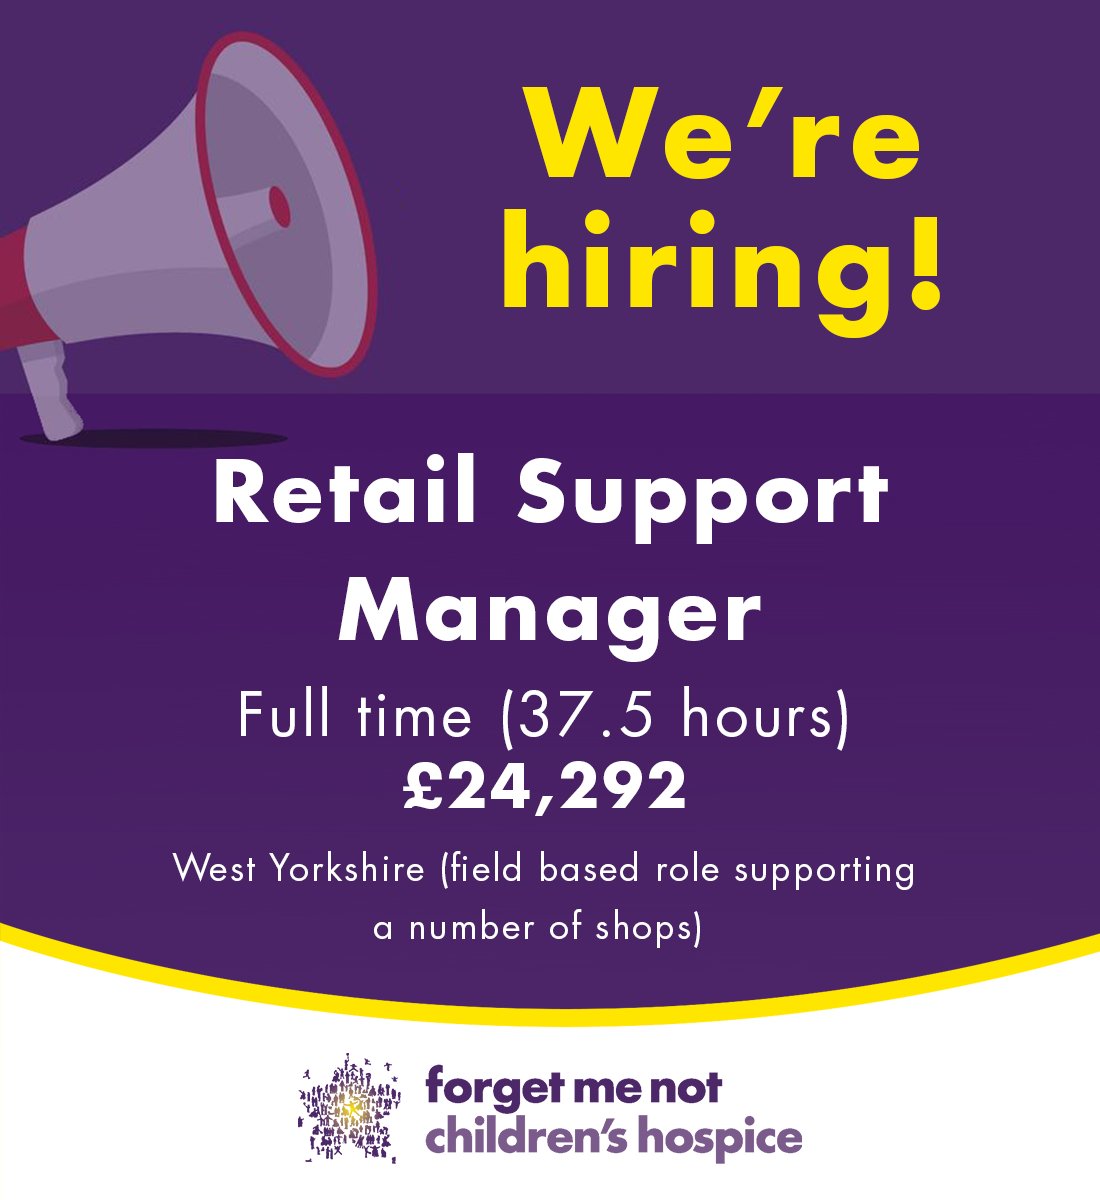 Retail Support Manager | £24,292 | 37.5 hrs/week If you’re looking for a role that’s full of variety and makes good use of your retail skills, then we want to hear from you! ow.ly/G68P50RpahJ